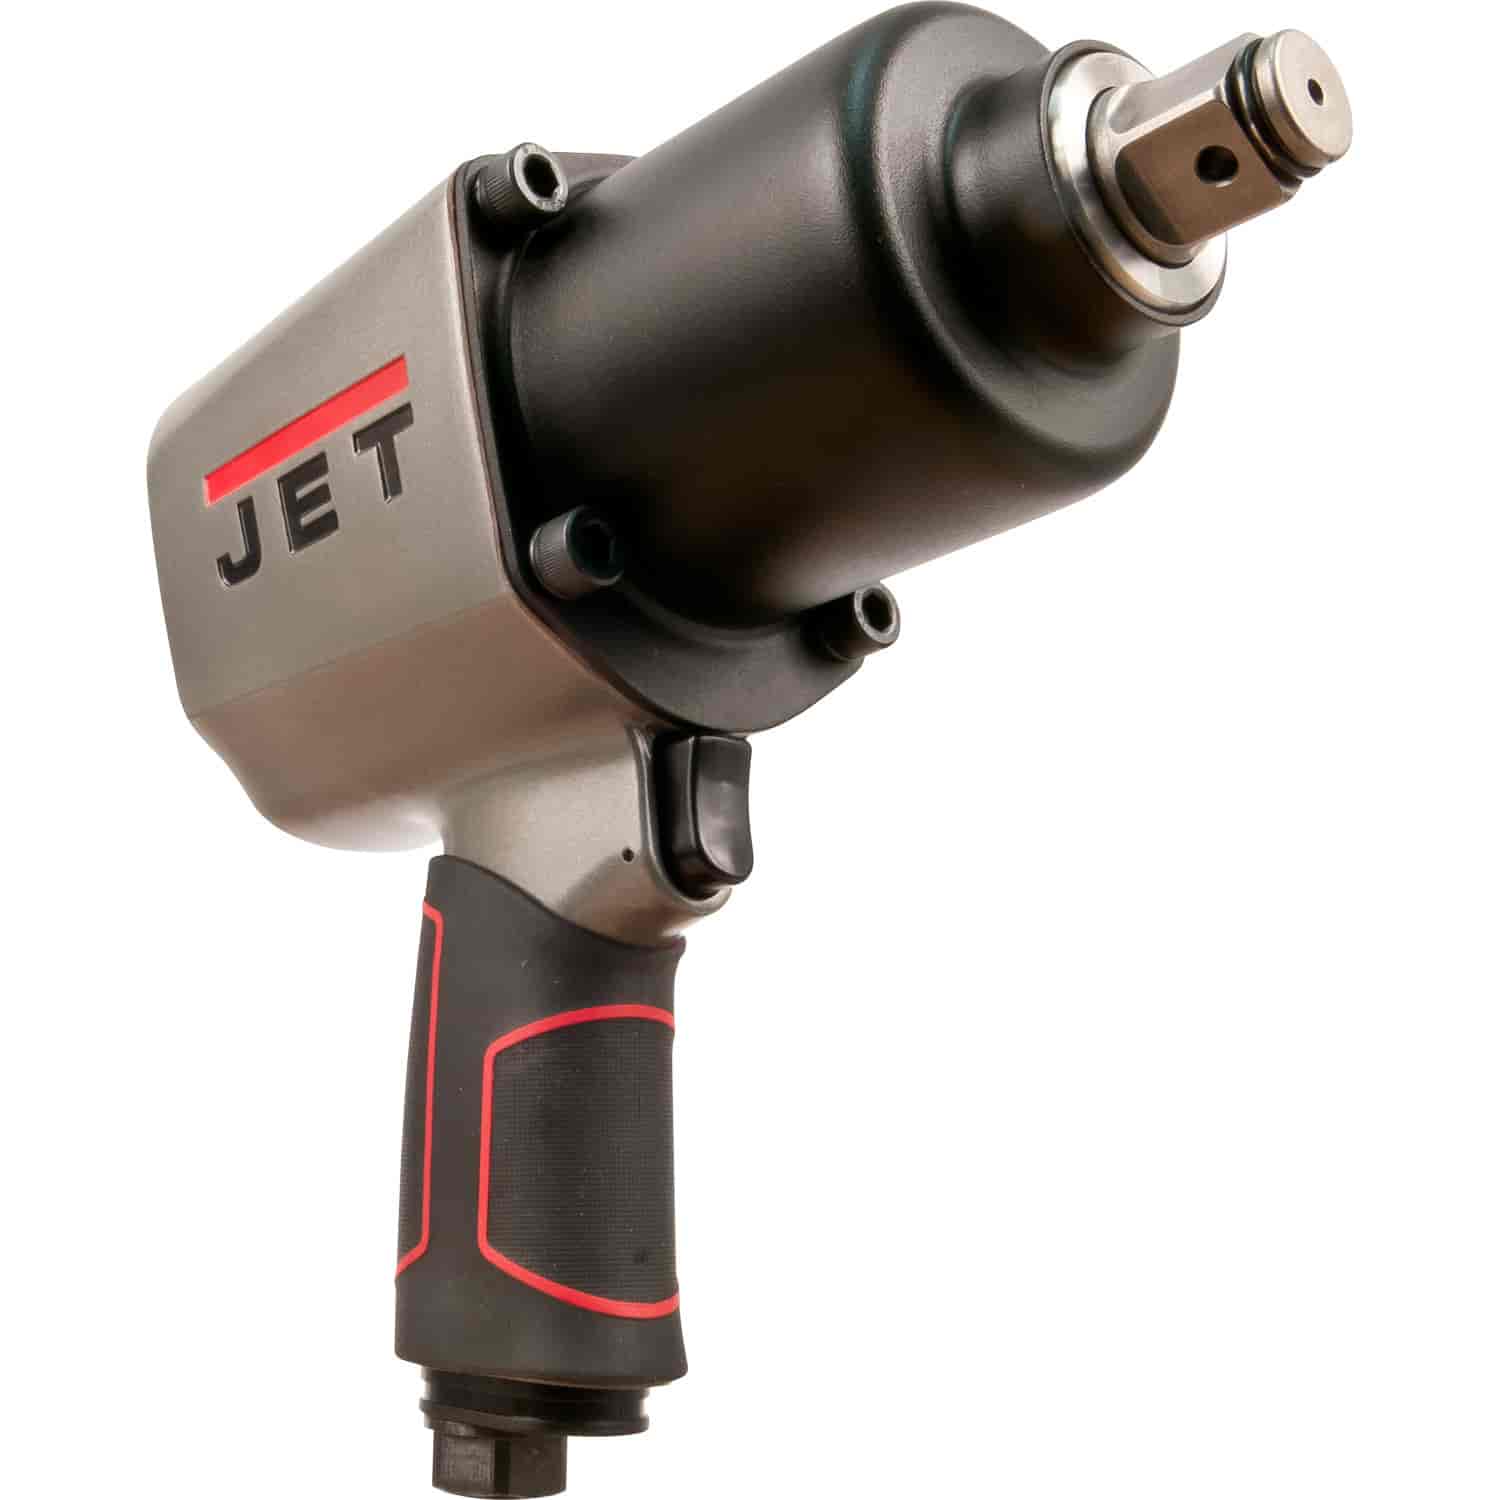 R8 3/4" Air Impact Wrench Square Drive: 3/4"